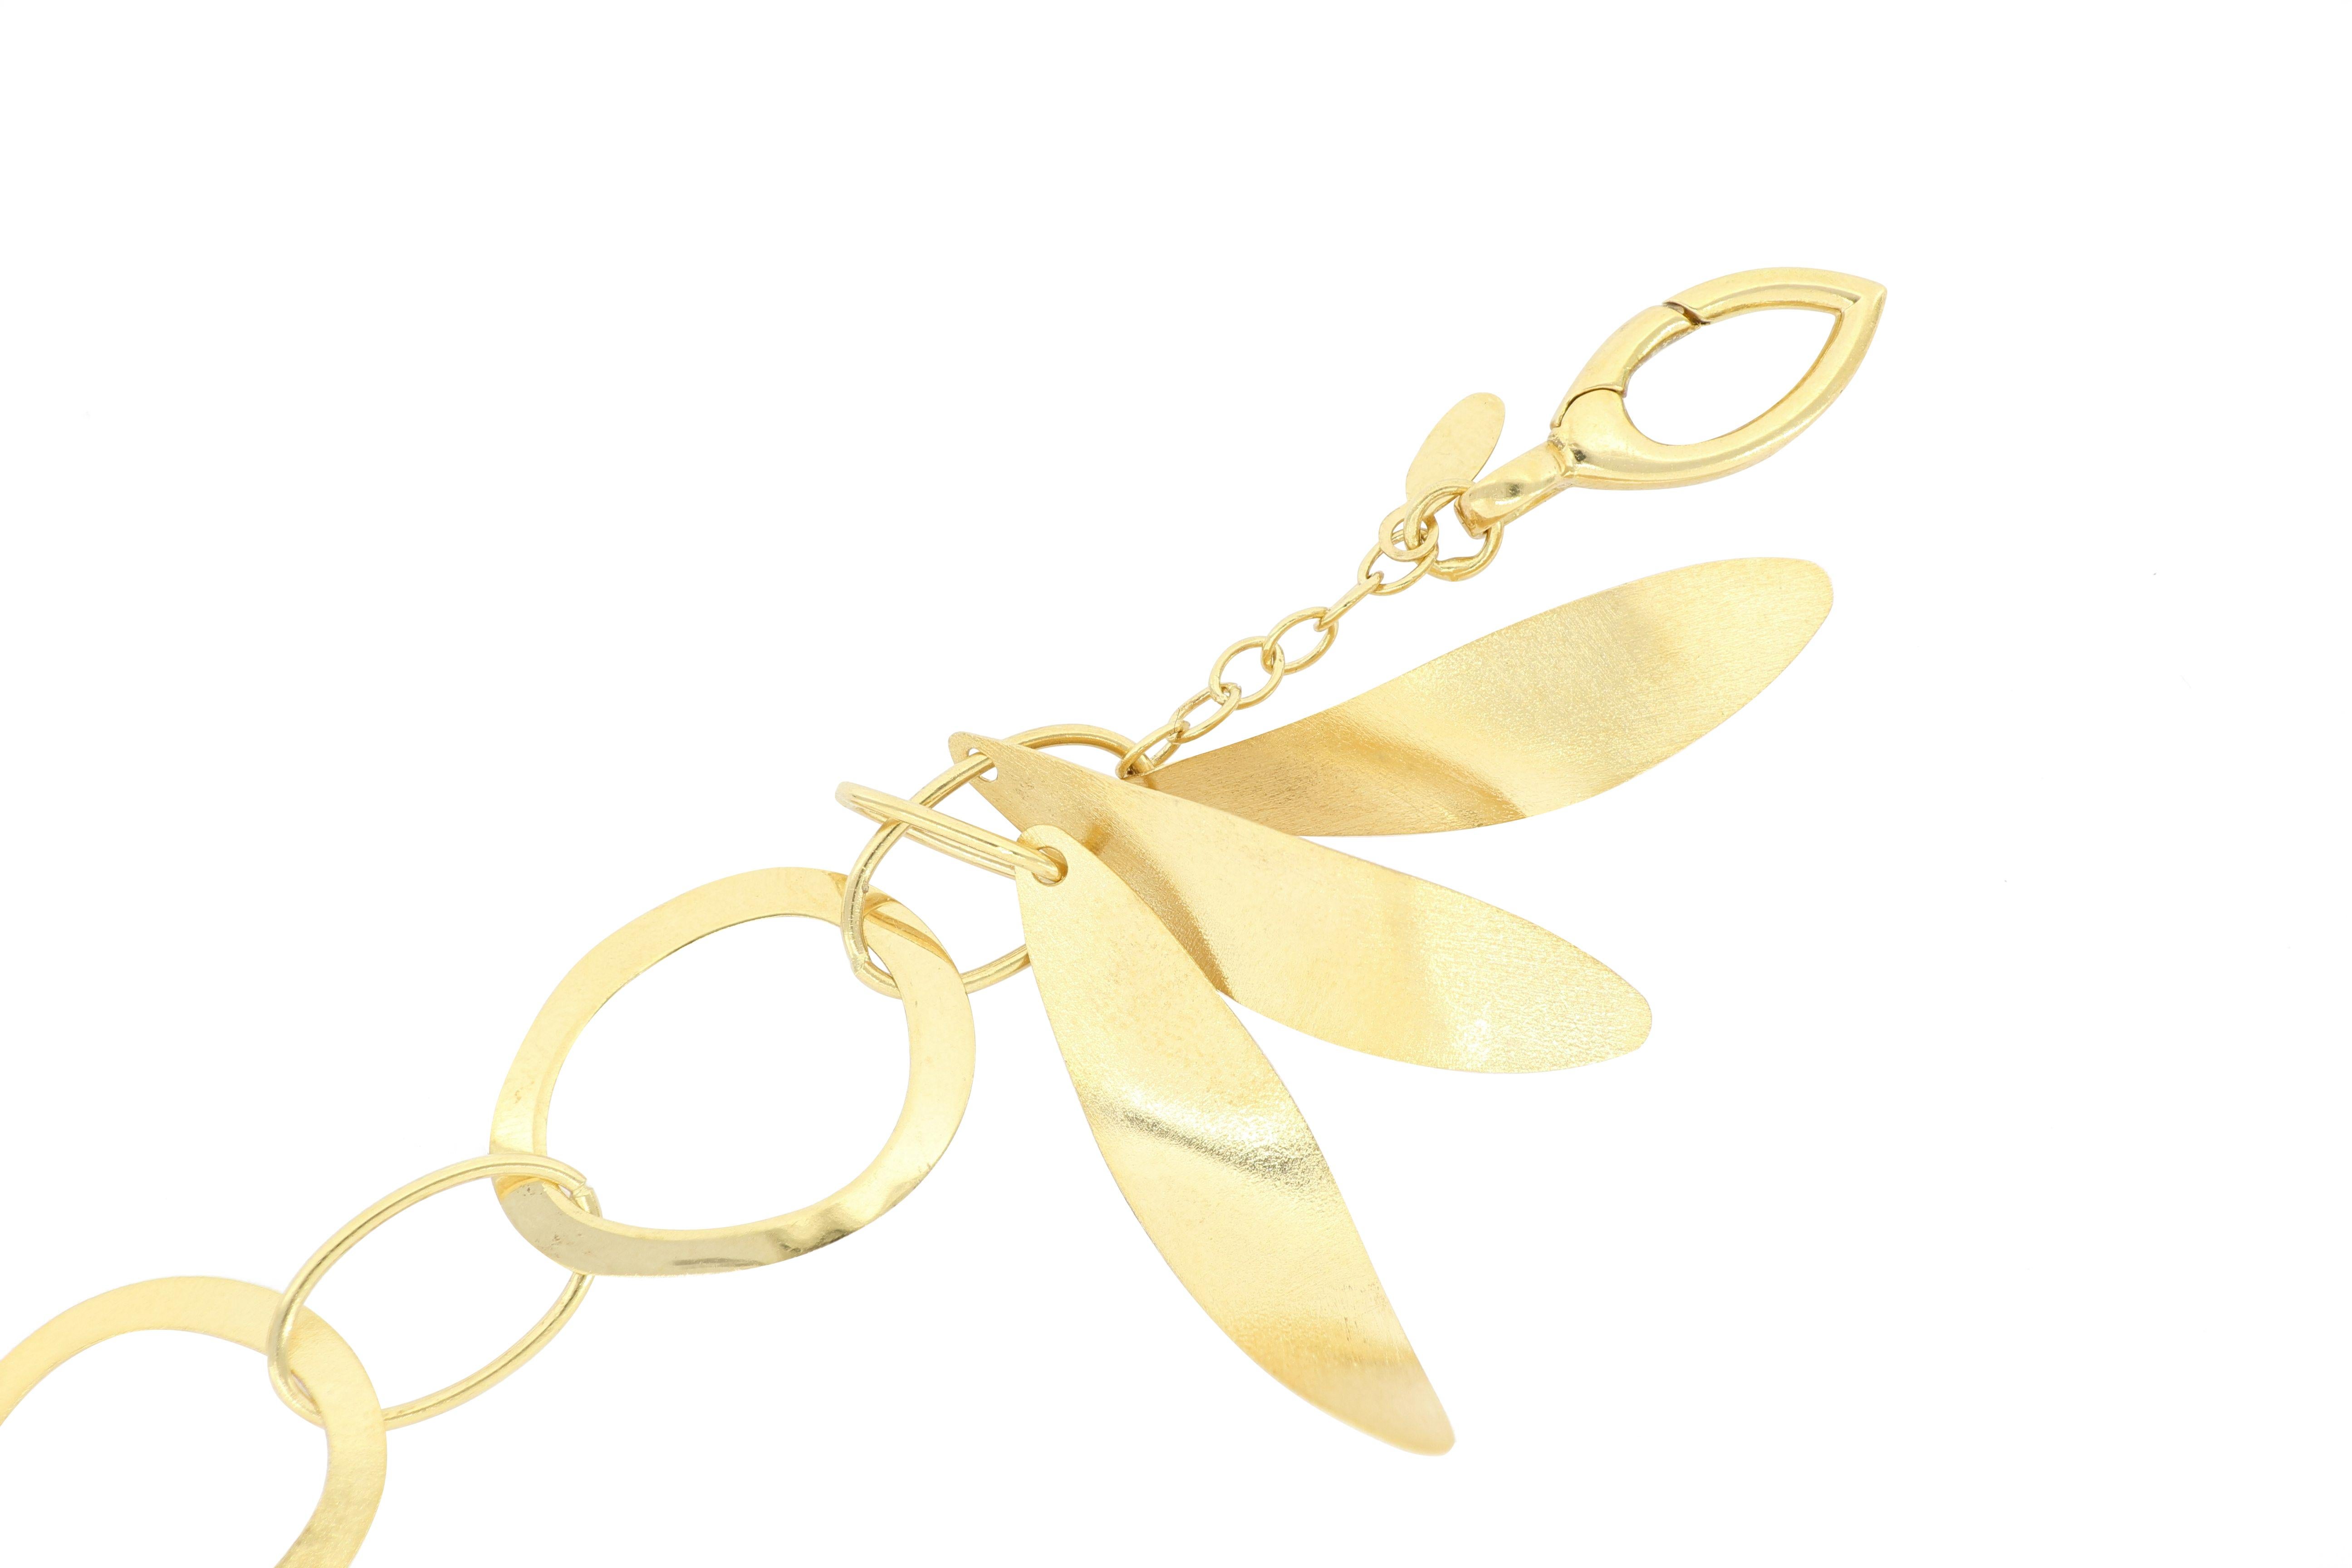 A stylish bracelet made of 18 karat  gold,  with brushed finish,  designed and crafted in Italy, suitable for everyday wear.
The company is renowned for its high jewellery collections with fabulous designs. Our designs reflect the cultural and